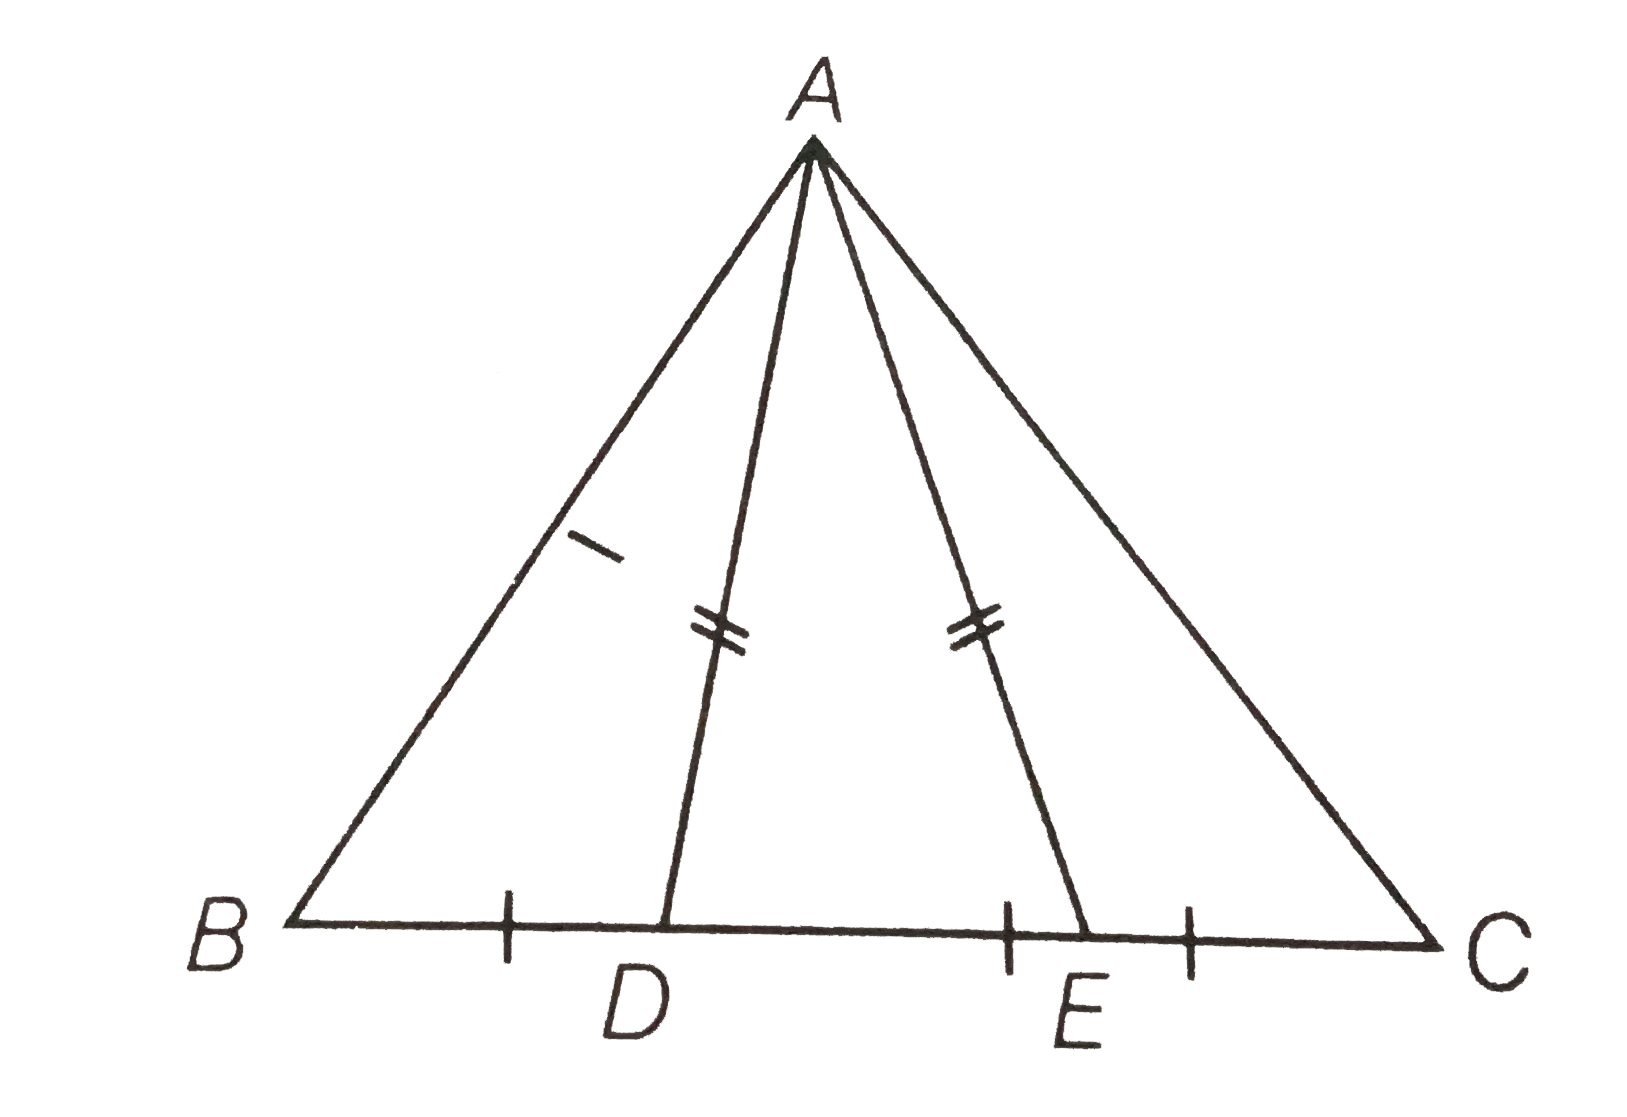 In figure ,D and E are Points on side BC of a Delta ABC such that BD=CE and AD=AE. Show that Delta ABD cong Delta ACE.